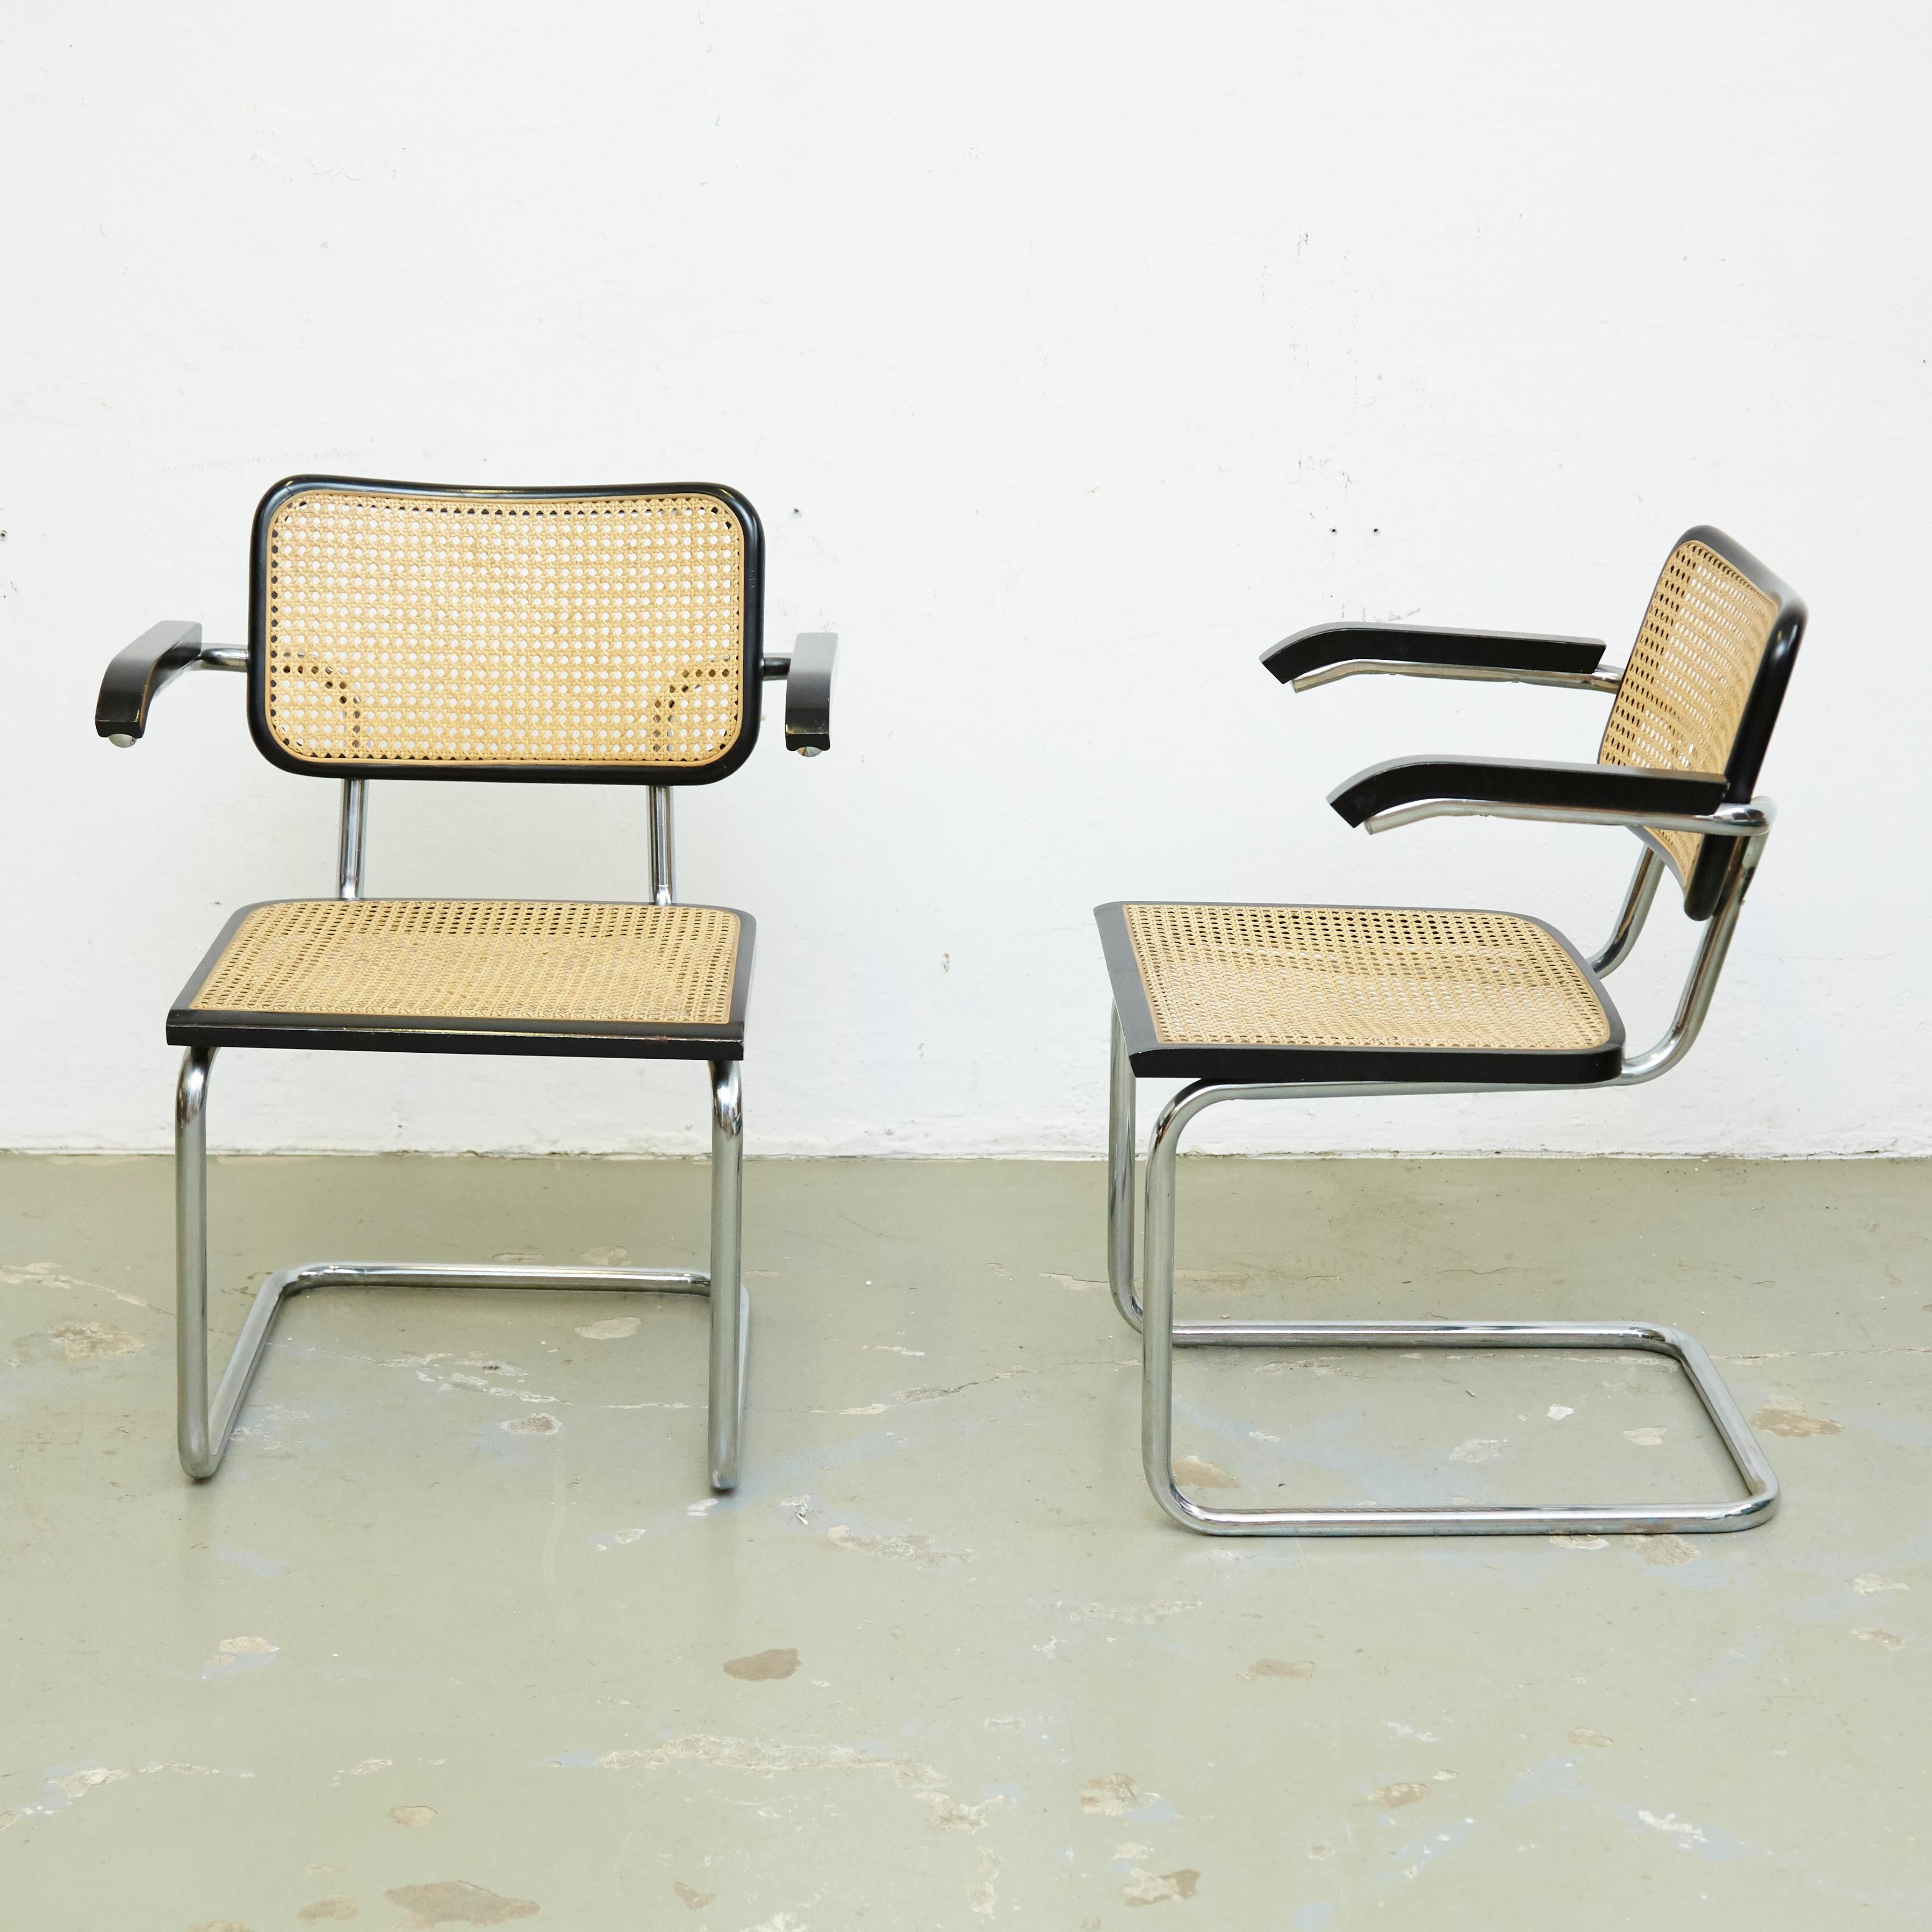 Set of four armchairs, model Cesca, designed by Marcel Breuer.
Manufactured in Italy circa 1970 by unknown manufacturer.

Metal pipe frame, wood seat and back structure and rattan.

In good original condition, with minor wear consistent with